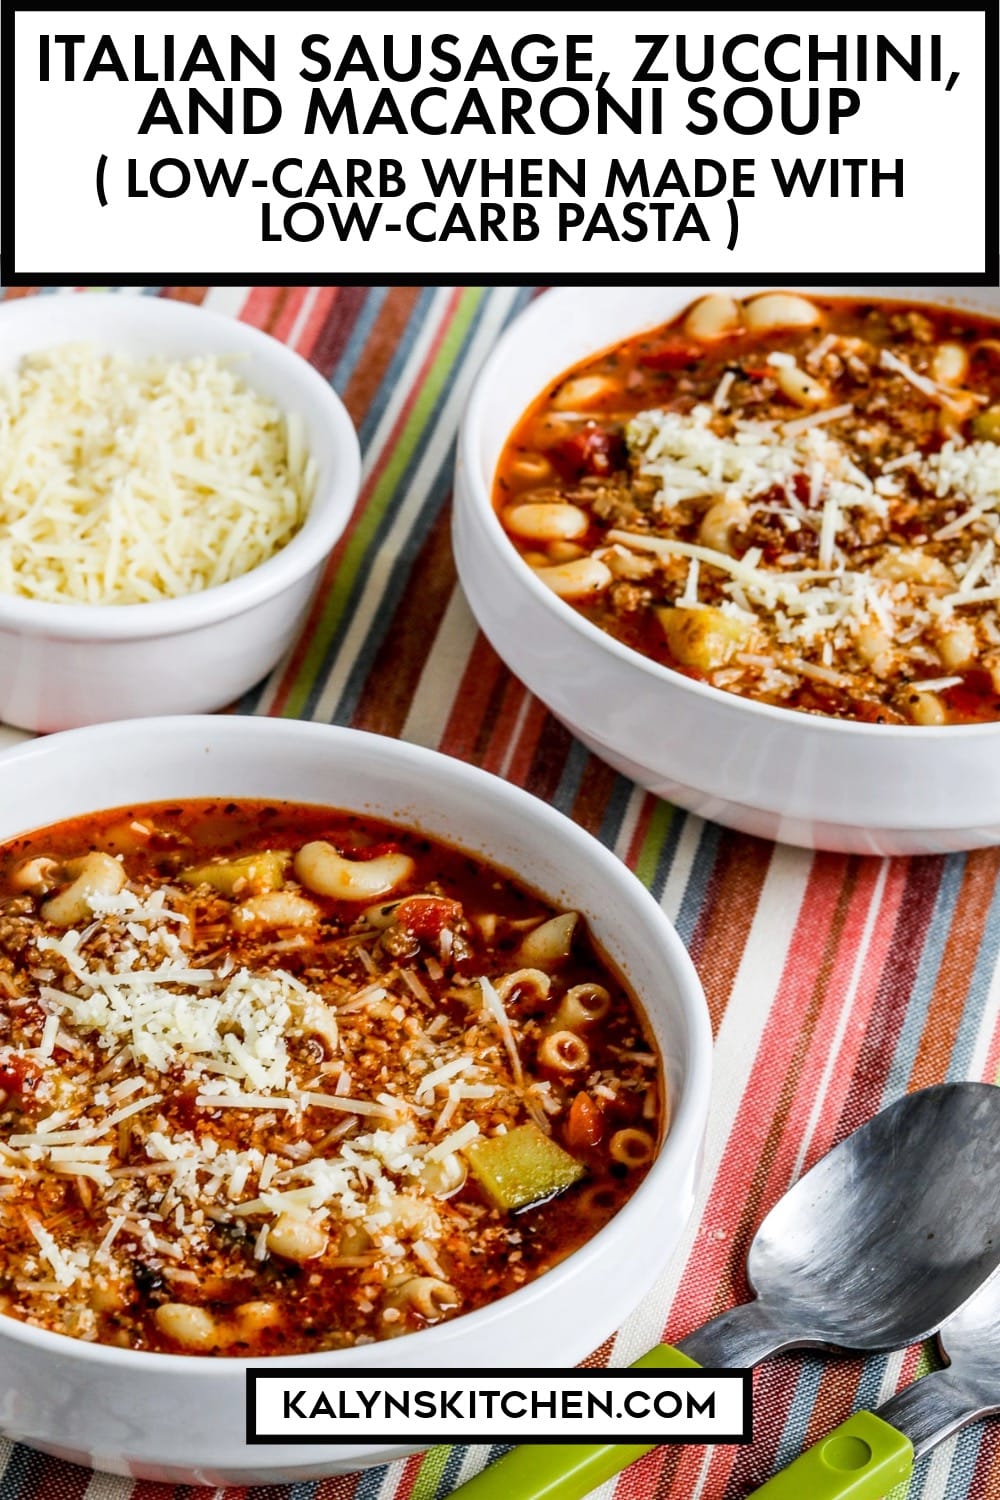 Pinterest image of Italian Sausage, Zucchini, and Macaroni Soup (with low-carb pasta)